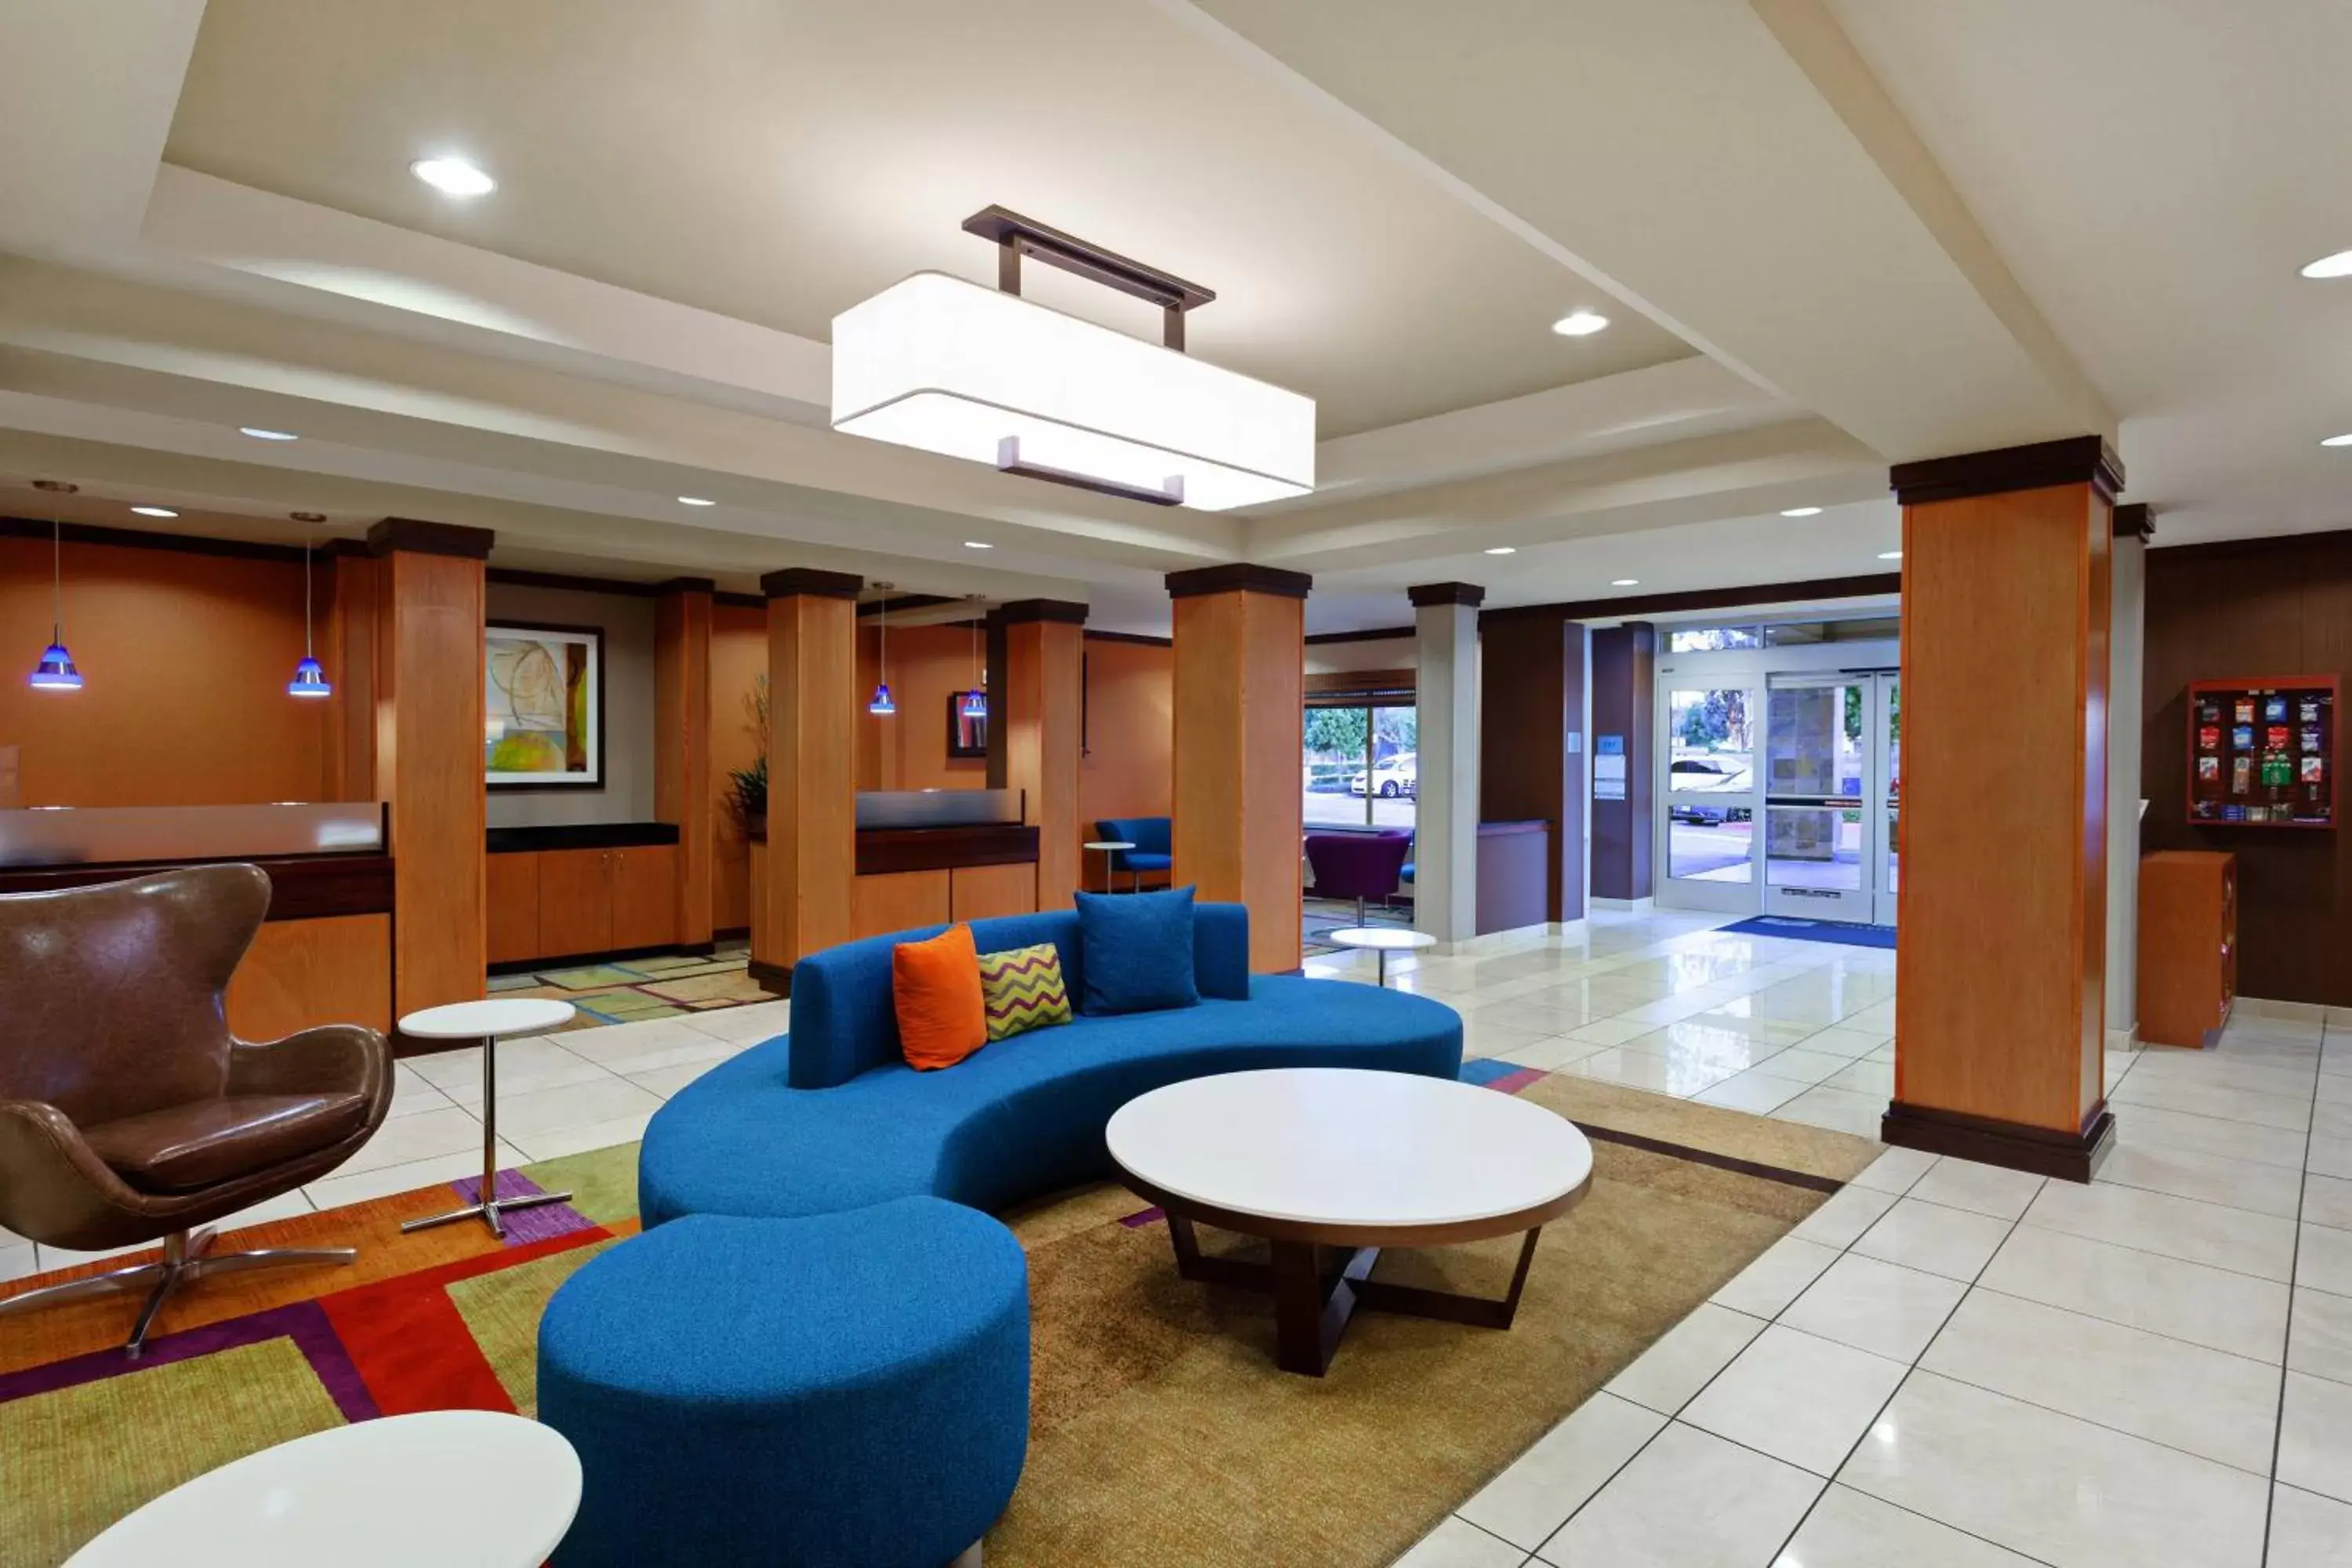 Lobby or reception in Fairfield Inn & Suites - Los Angeles West Covina